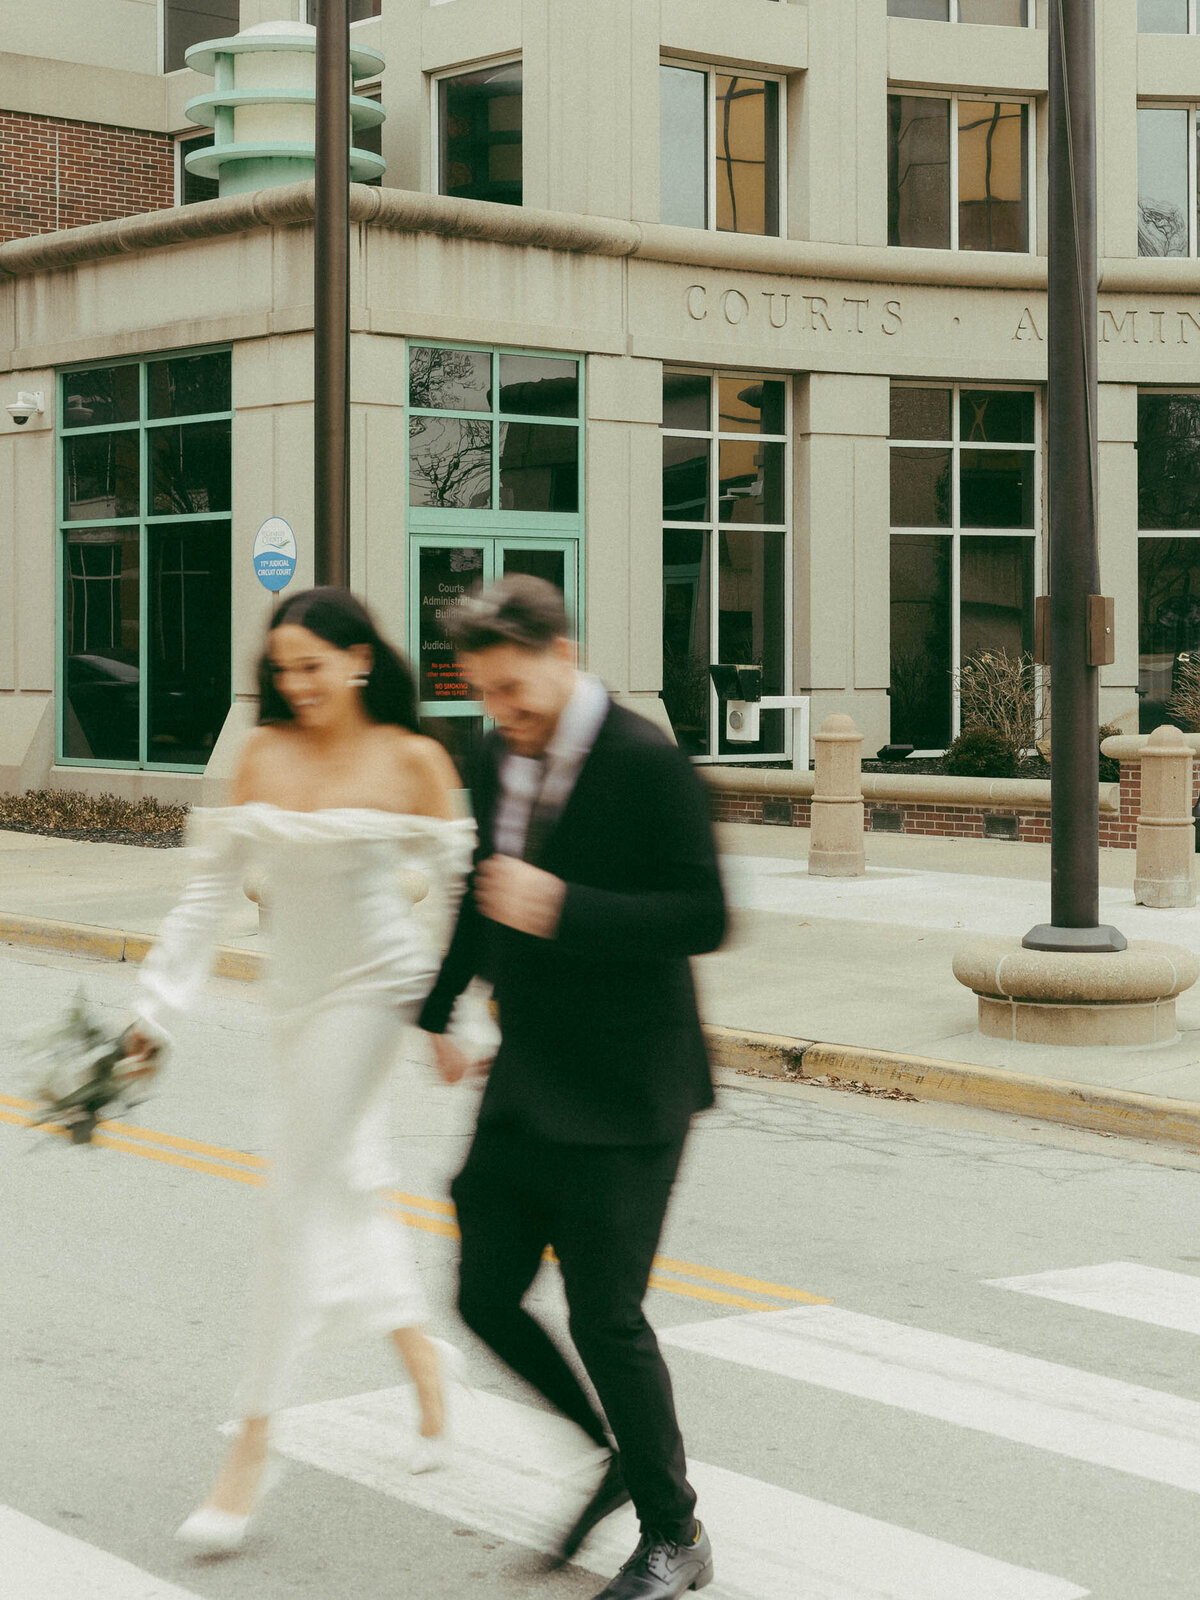 Intimate City Hall Elopement - Stacey Vandas Photography 48